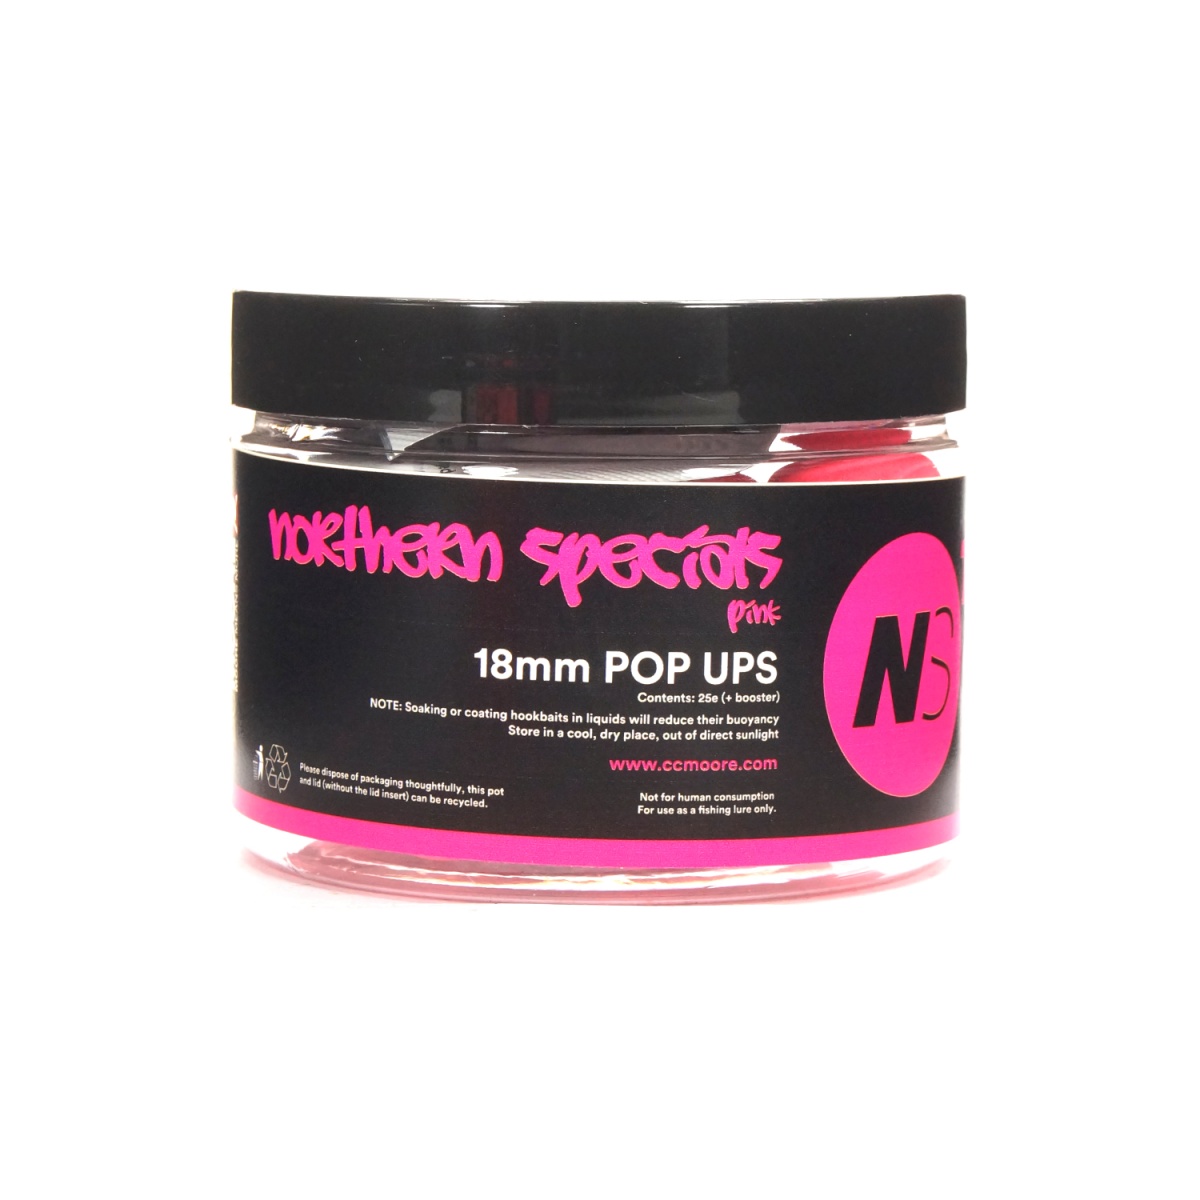 CcMoore Northern Special NS1 Pink Pop Ups 18 mm rozmiar